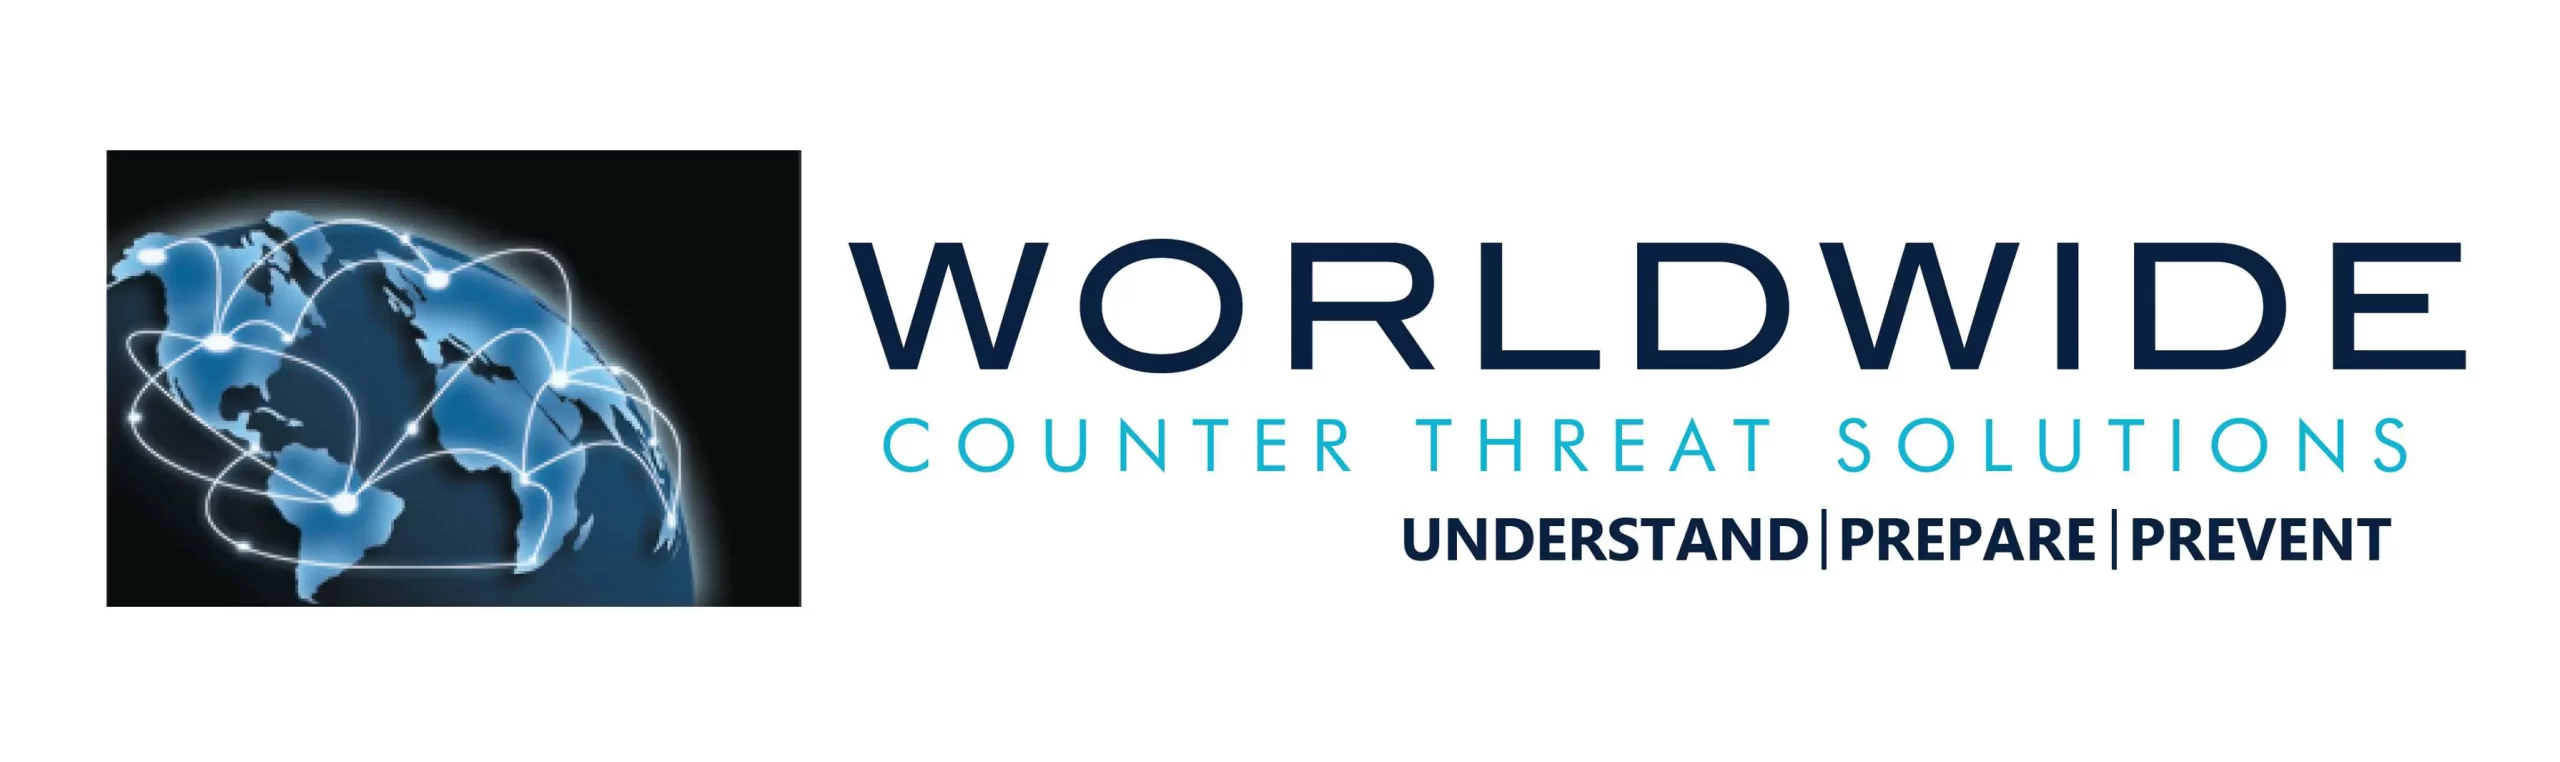 Worldwide Counter Threat Solutions